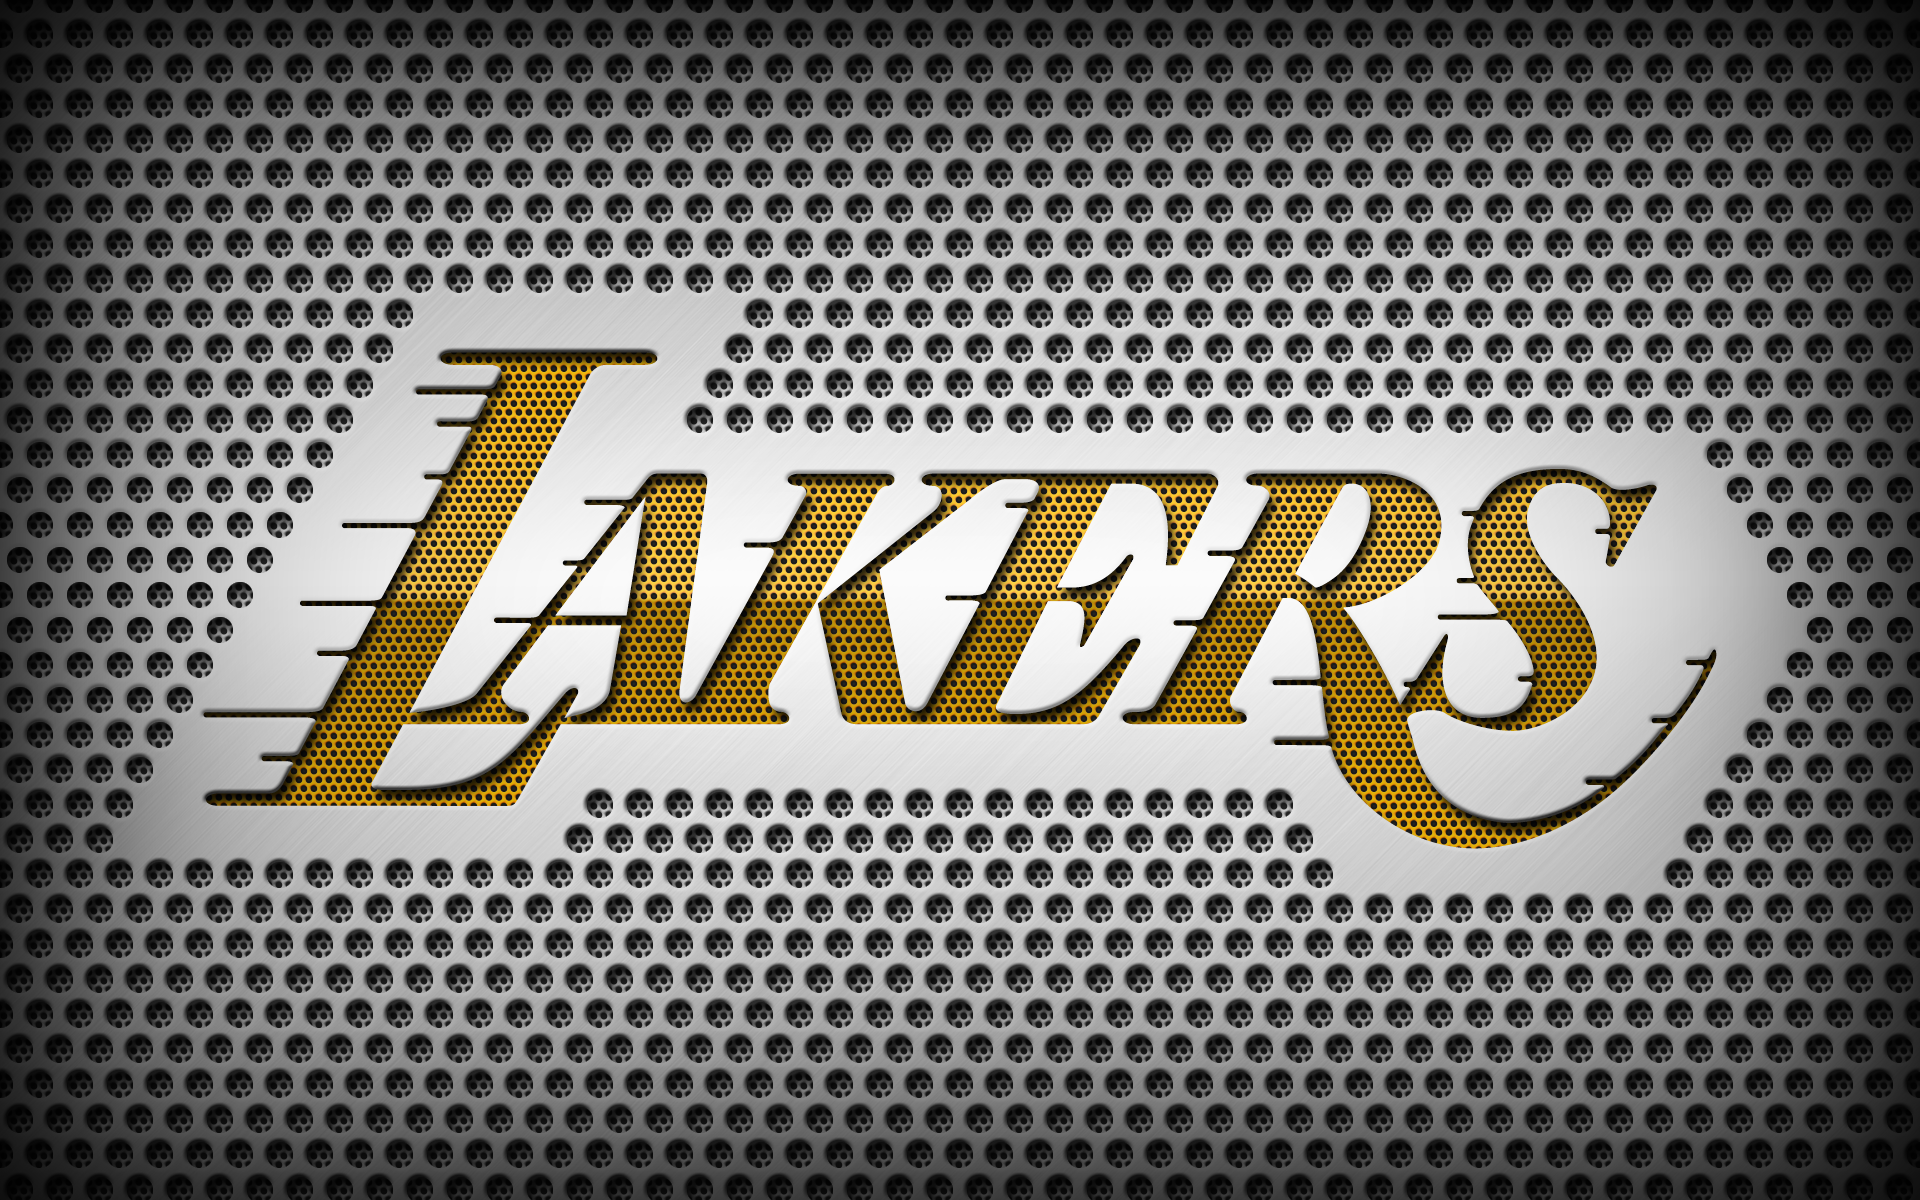 Awesome Lakers Wallpaper Image Screen